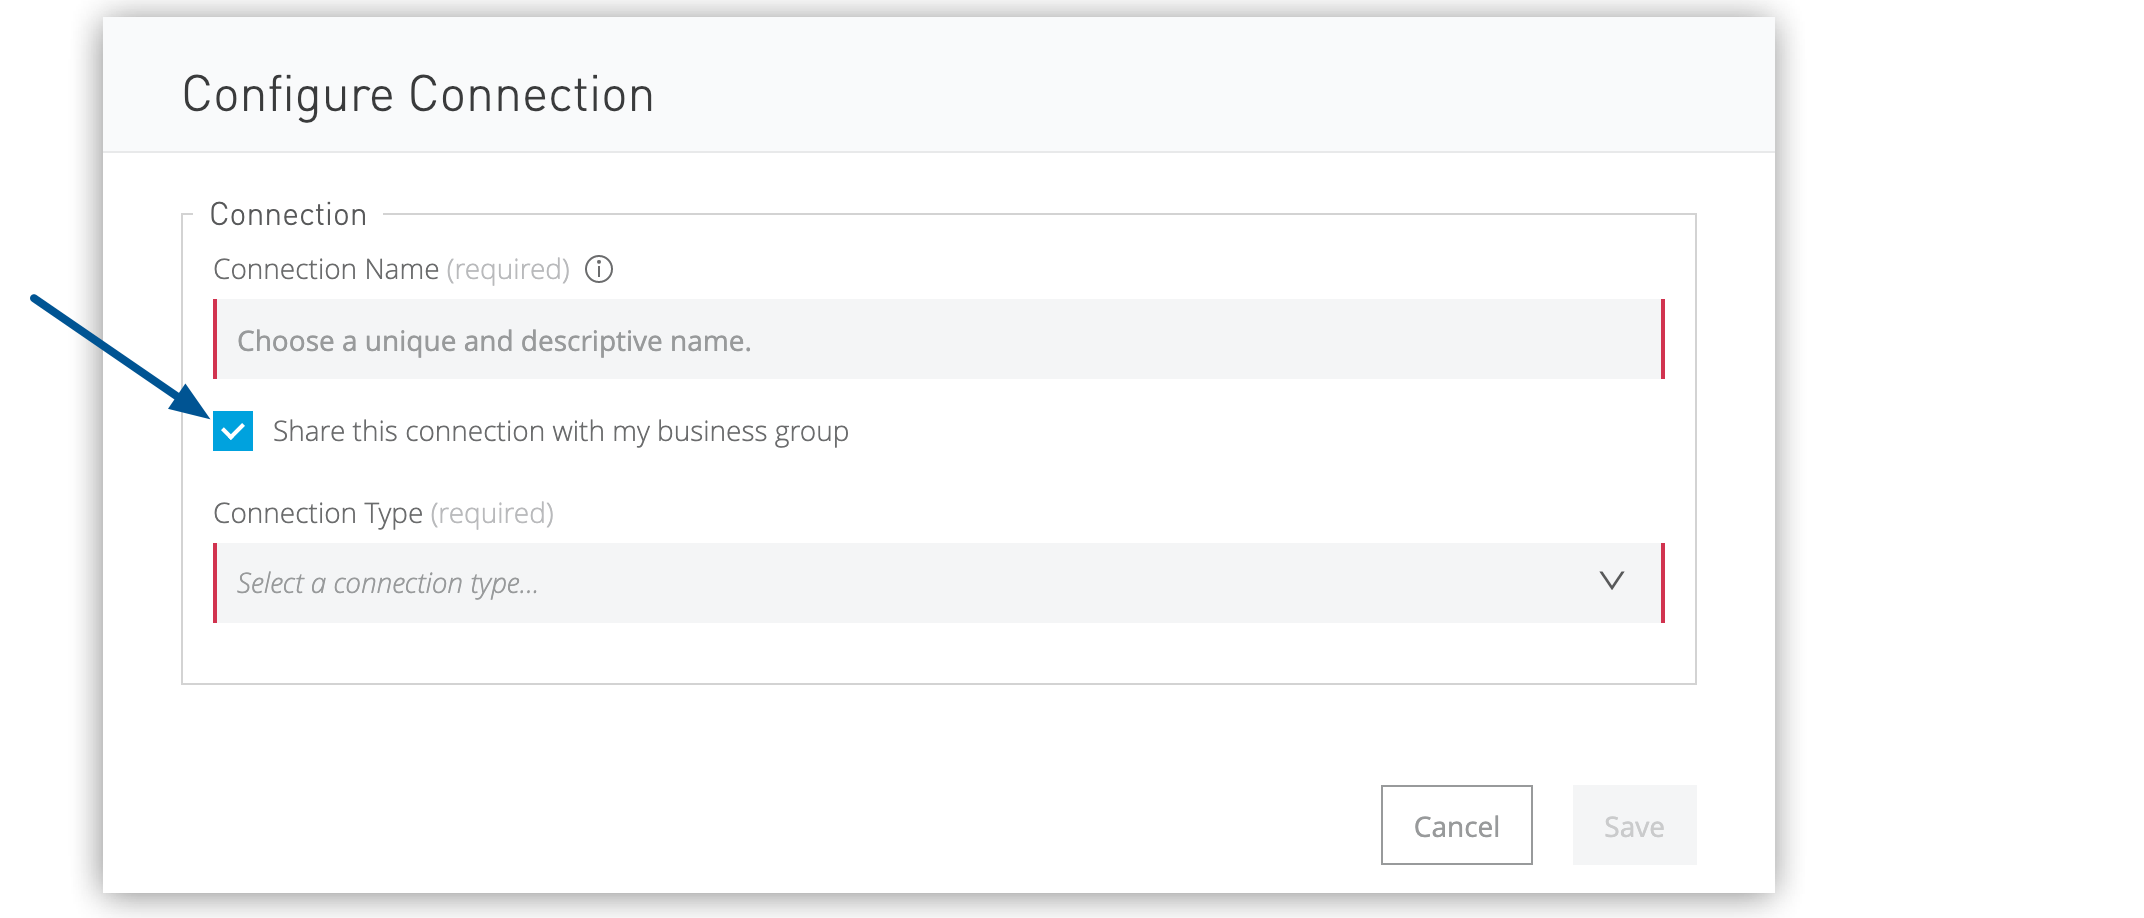 The location of the *Share this connection with my business group* checkbox